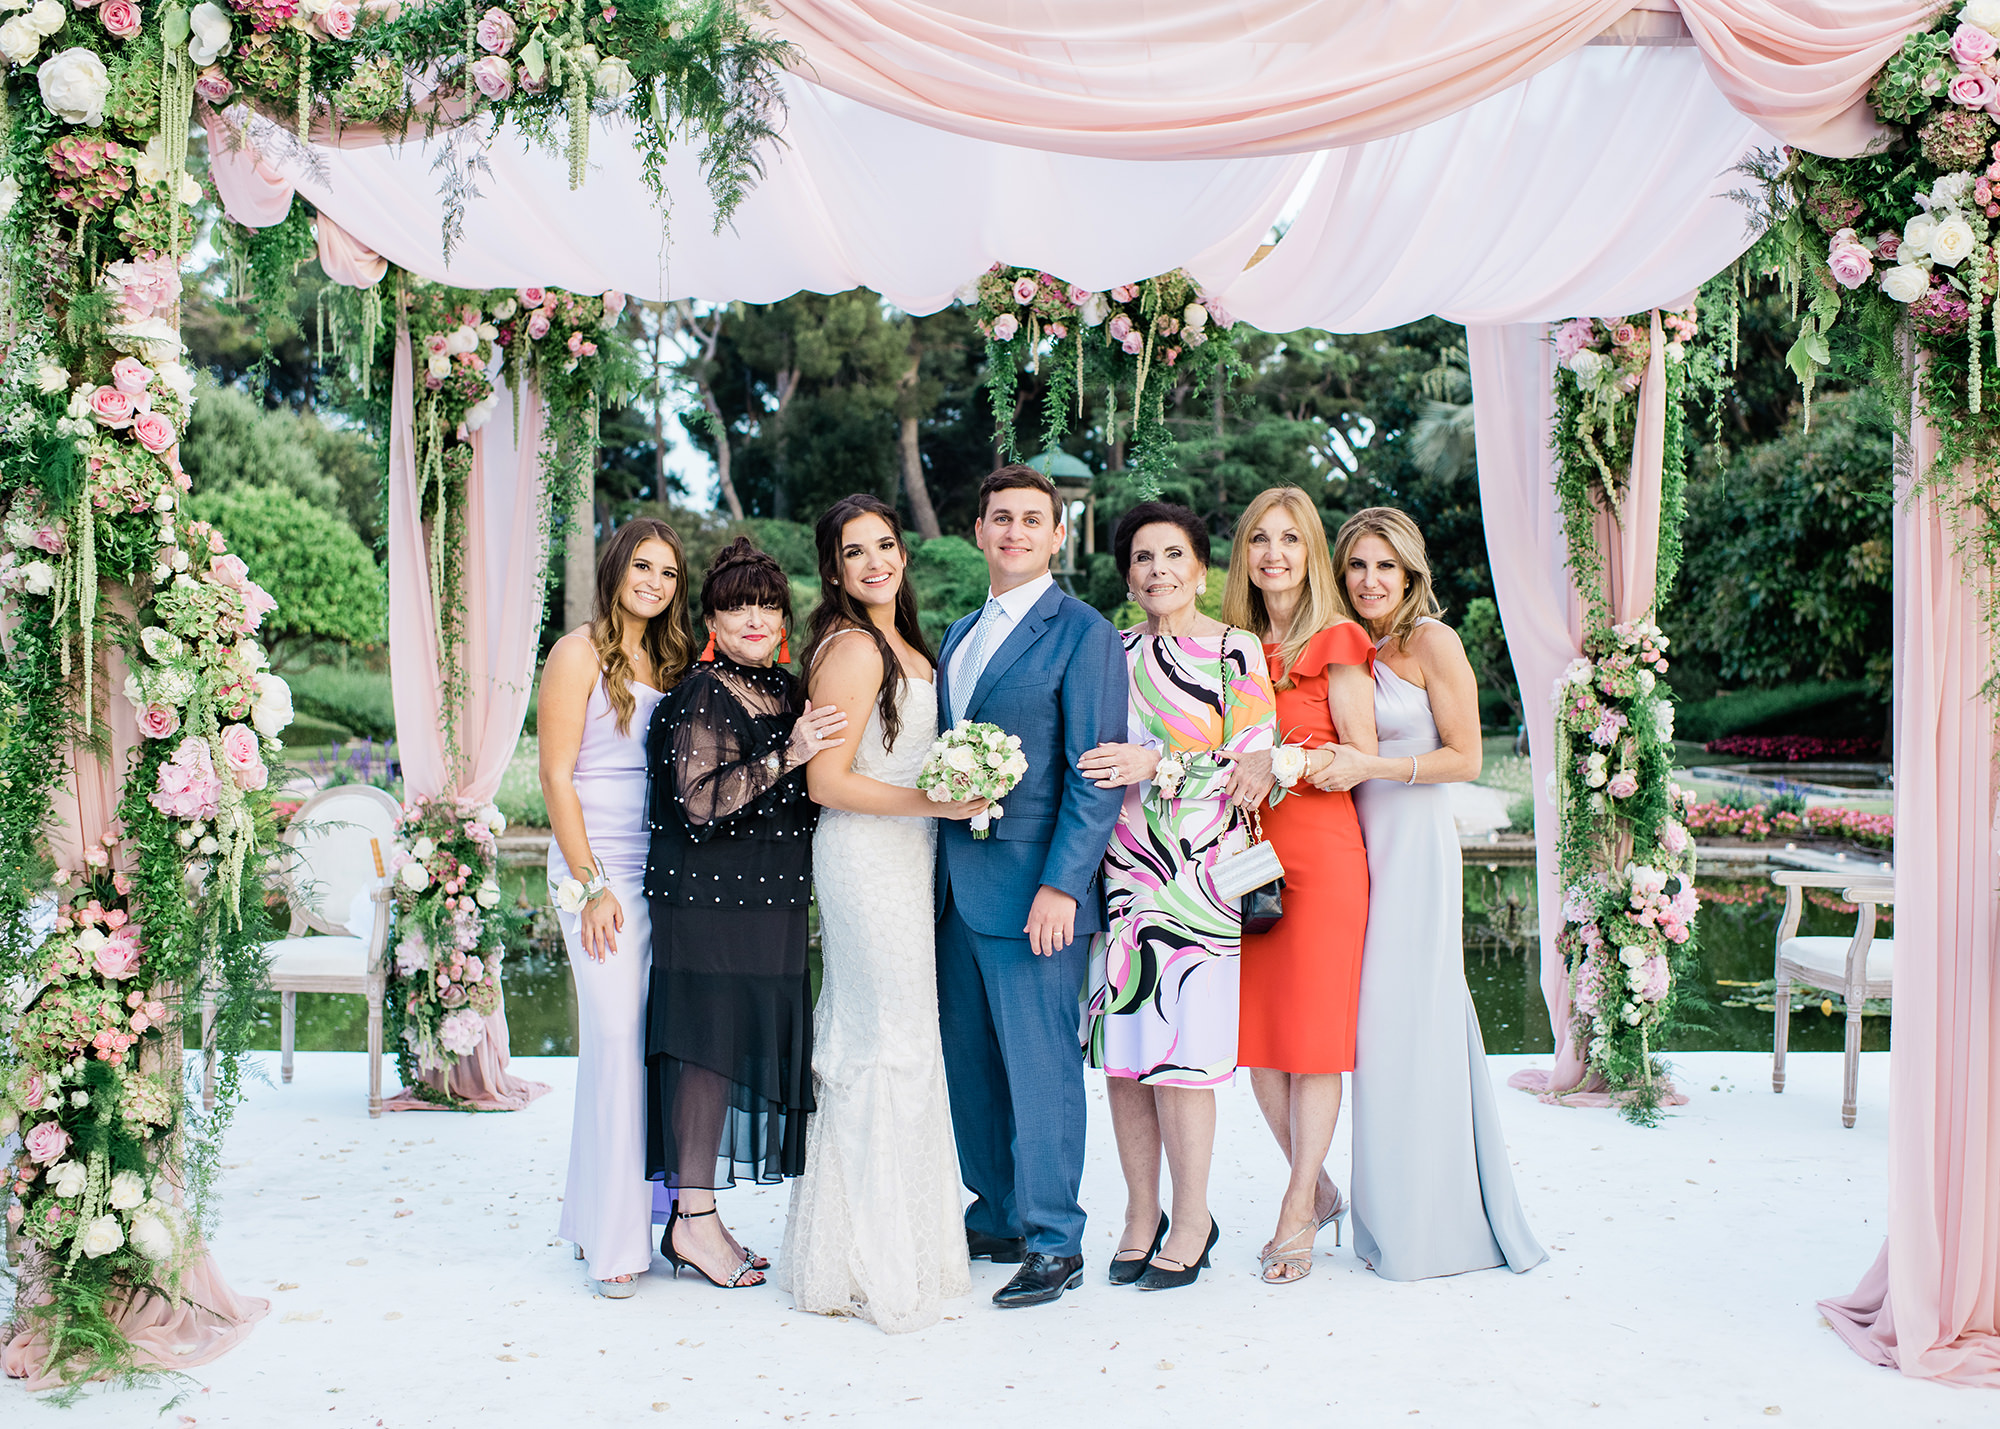 Top tips for group portraits at weddings